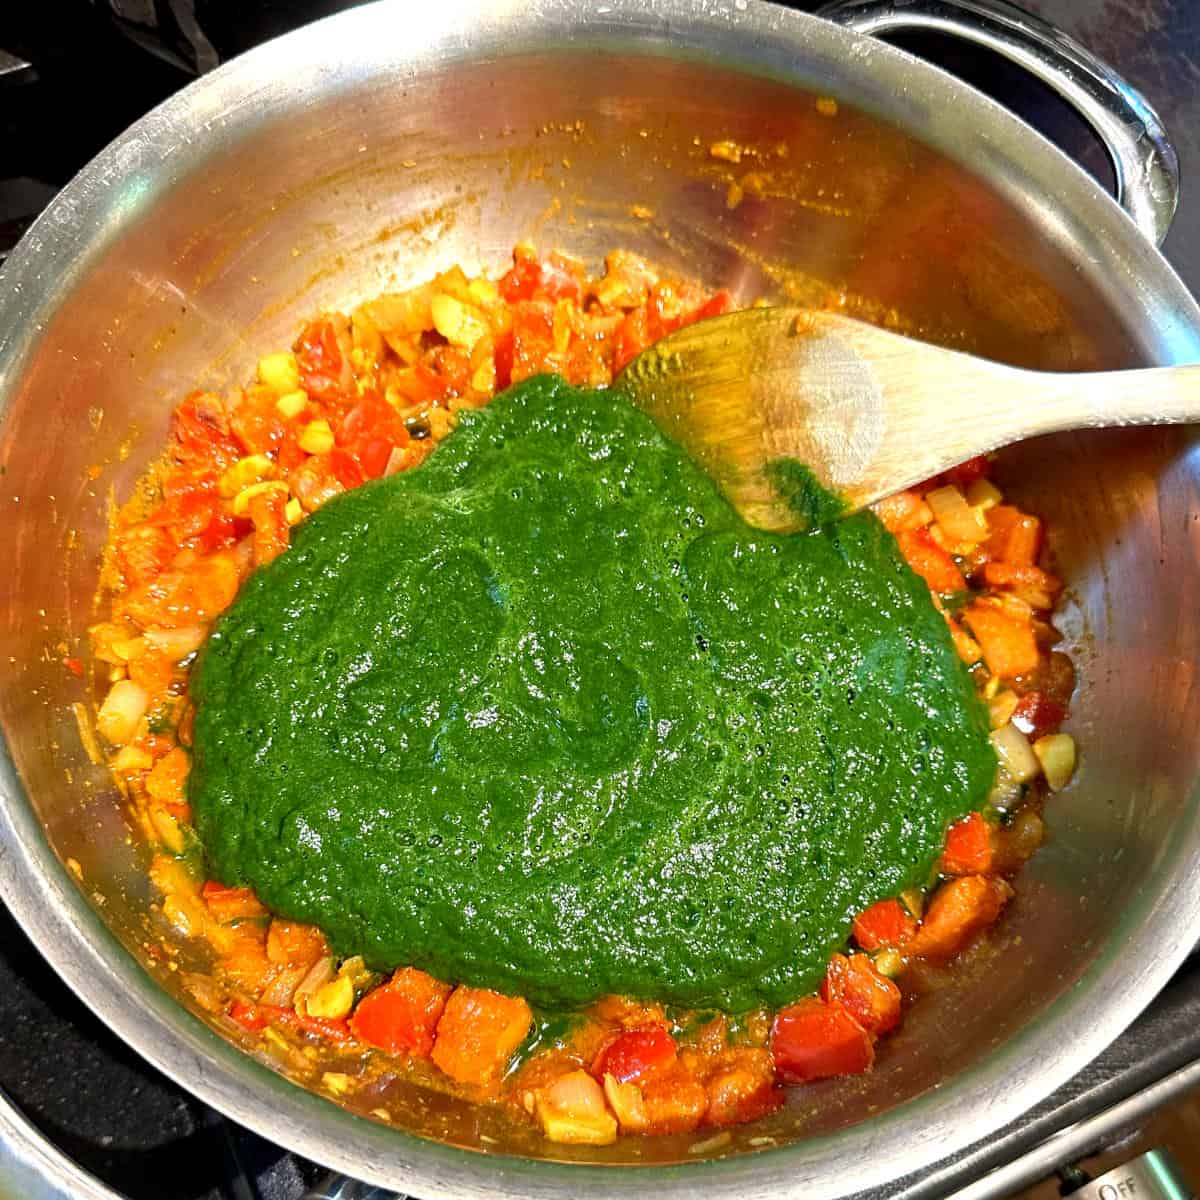 Swiss chard puree added to pot with spices, onions and tomatoes.